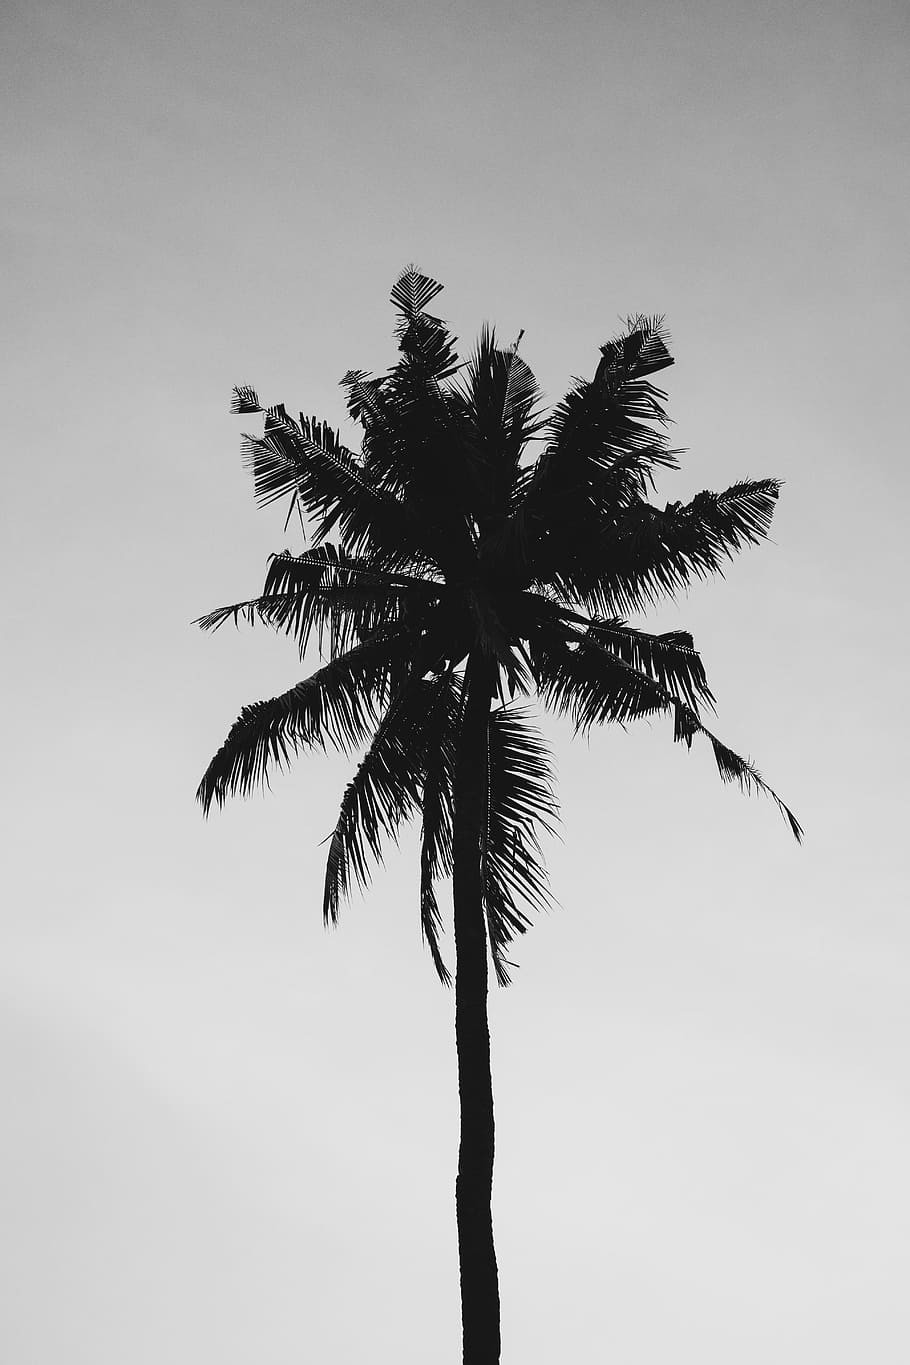 coconut, tree, cloudy, summer, nature, palm tree, gray sky, green, plant, tropical climate